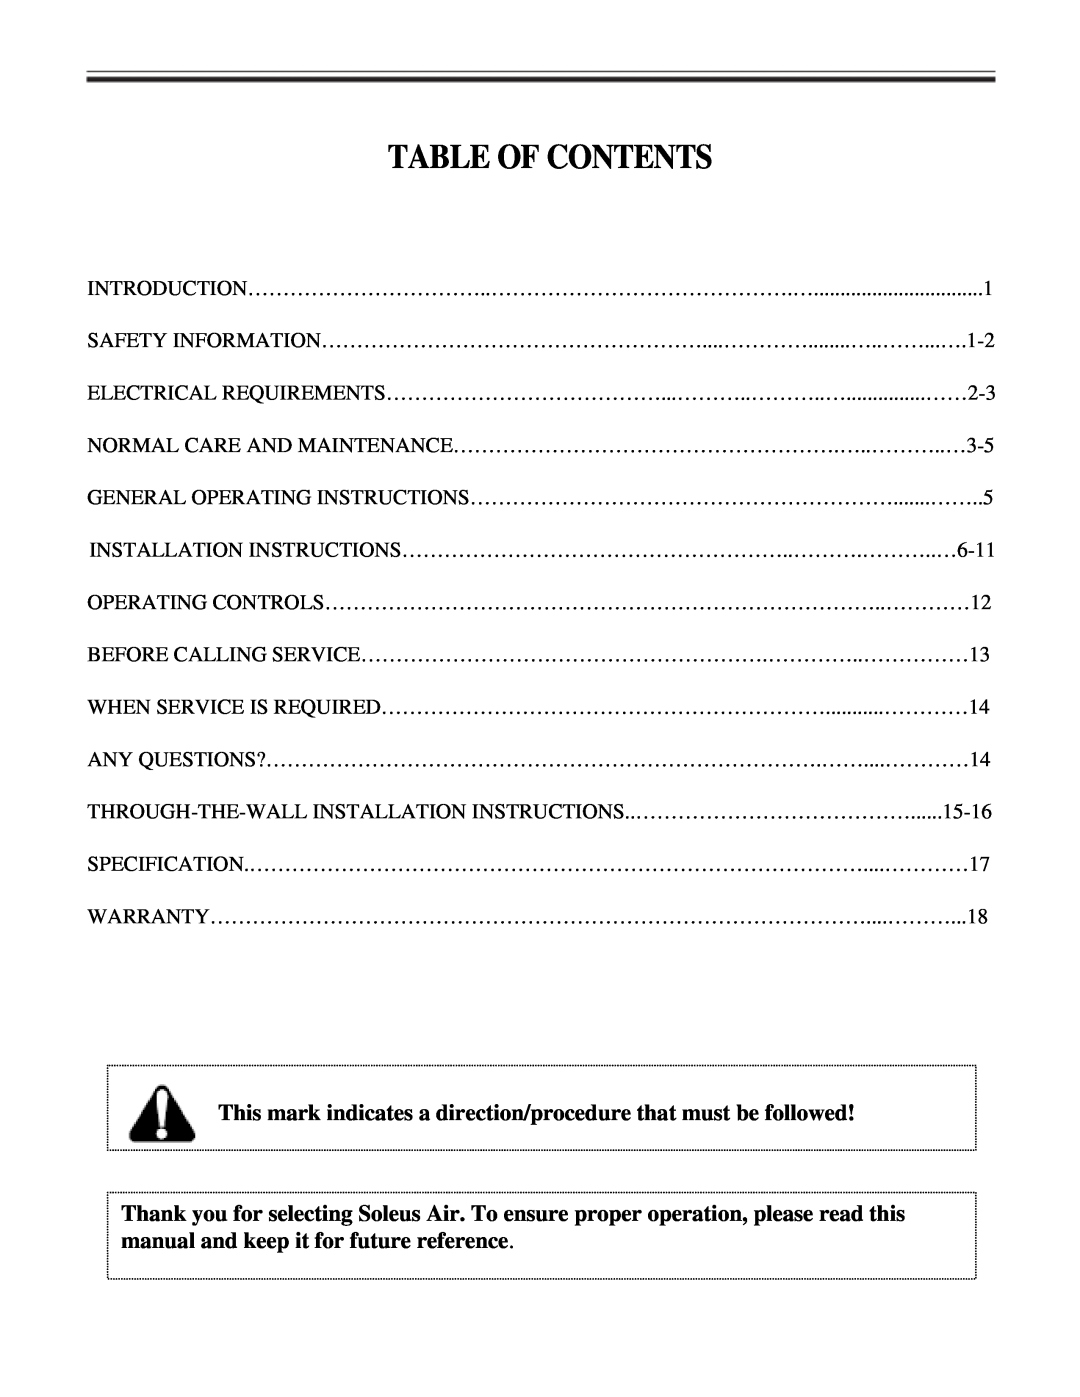 Soleus Air KC-45H installation manual Table Of Contents 